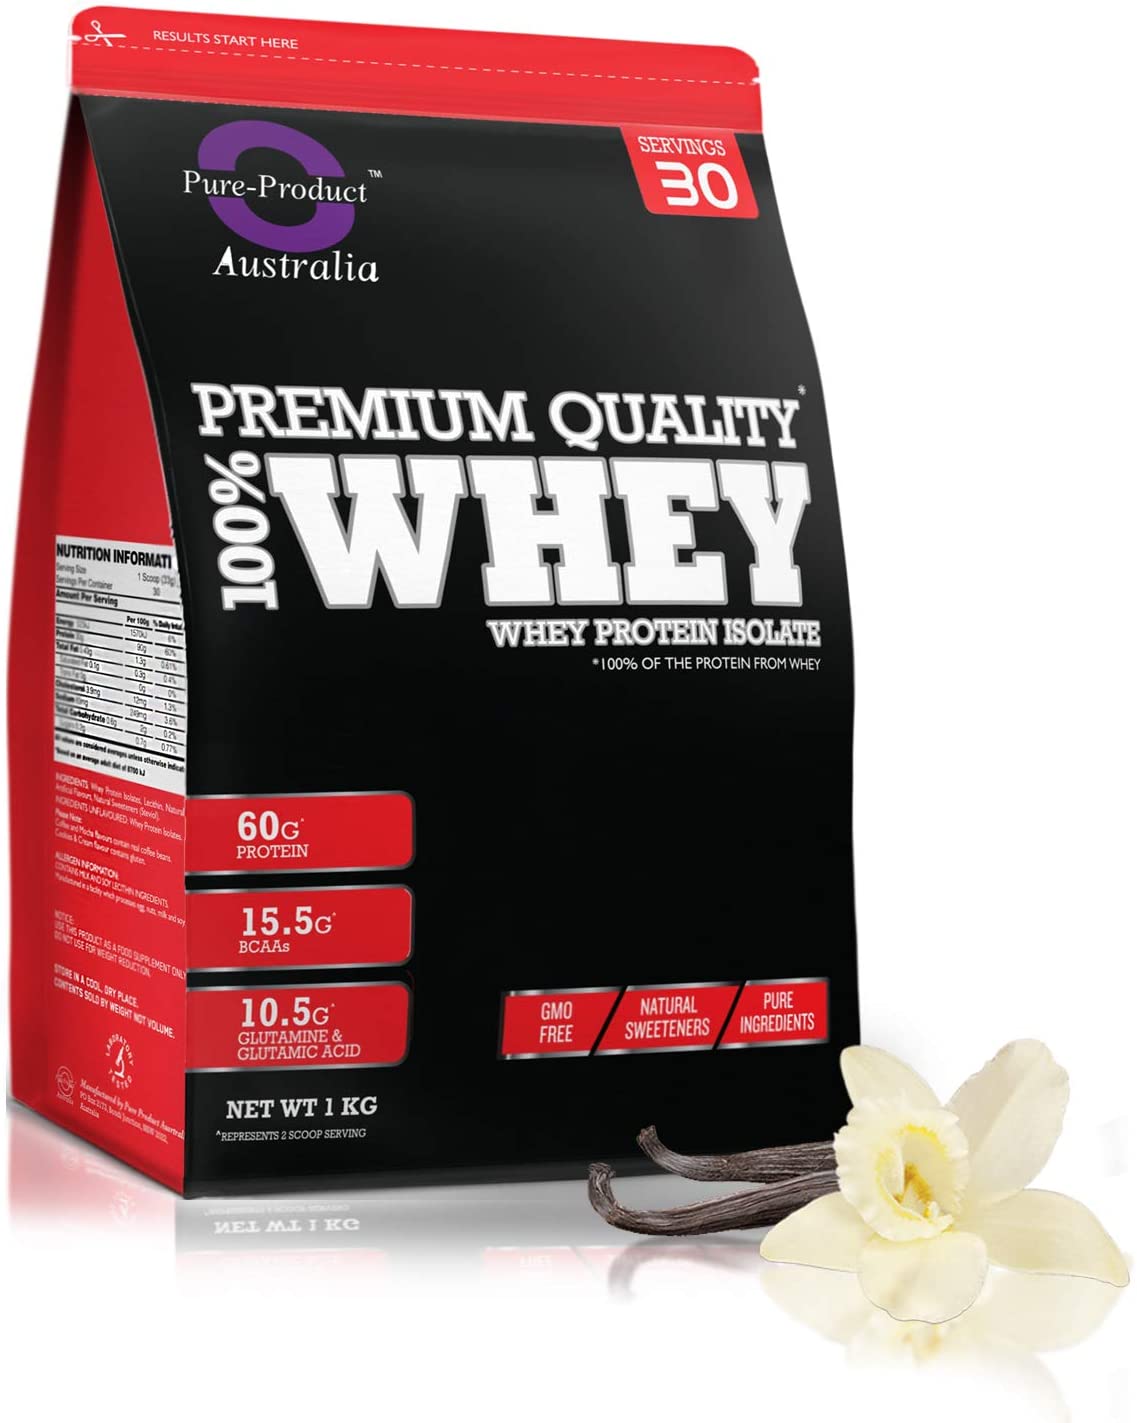 Get Pure Product Australia Whey Protein Isolate -best price deal- for $29.95+free delivery